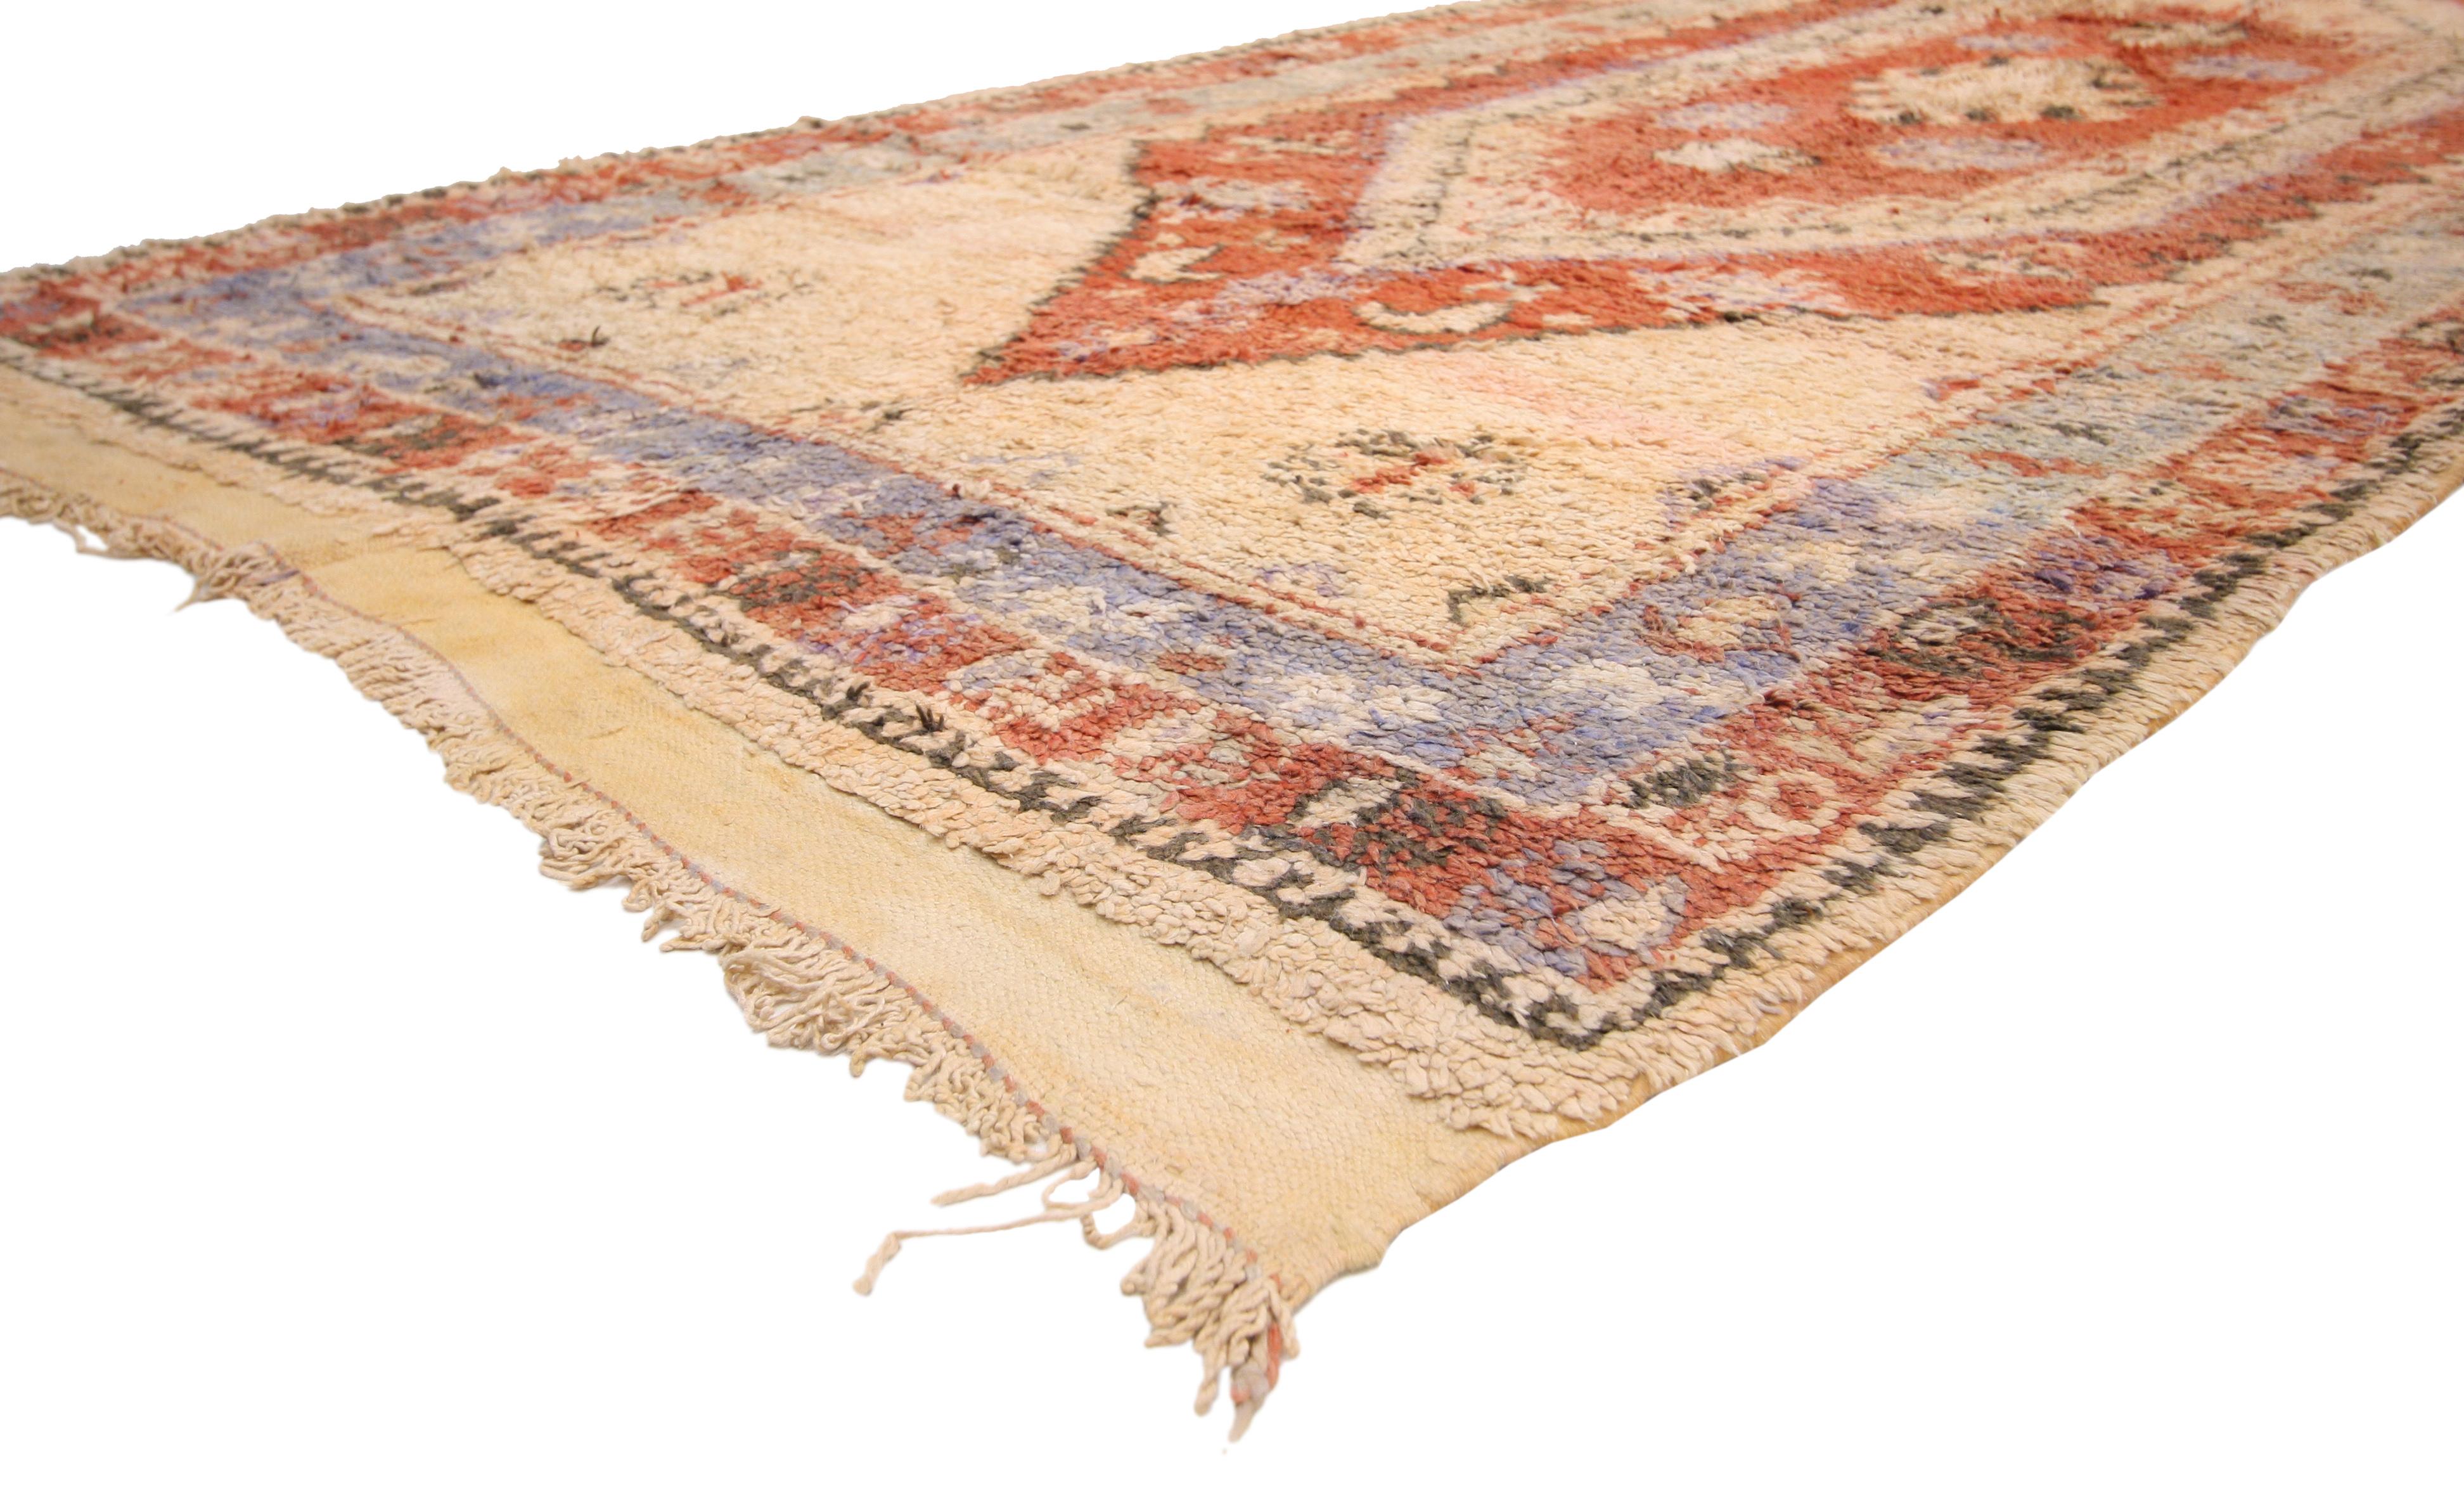 20034 Vintage Boujad Moroccan Rug 05'02 x 11'03. Embrace the lively essence of Boujad rugs, born from the vibrant city of Boujad in the Khouribga region. Skillfully crafted by Berber tribes, notably the Haouz and Rehamna, these rugs embody tradition